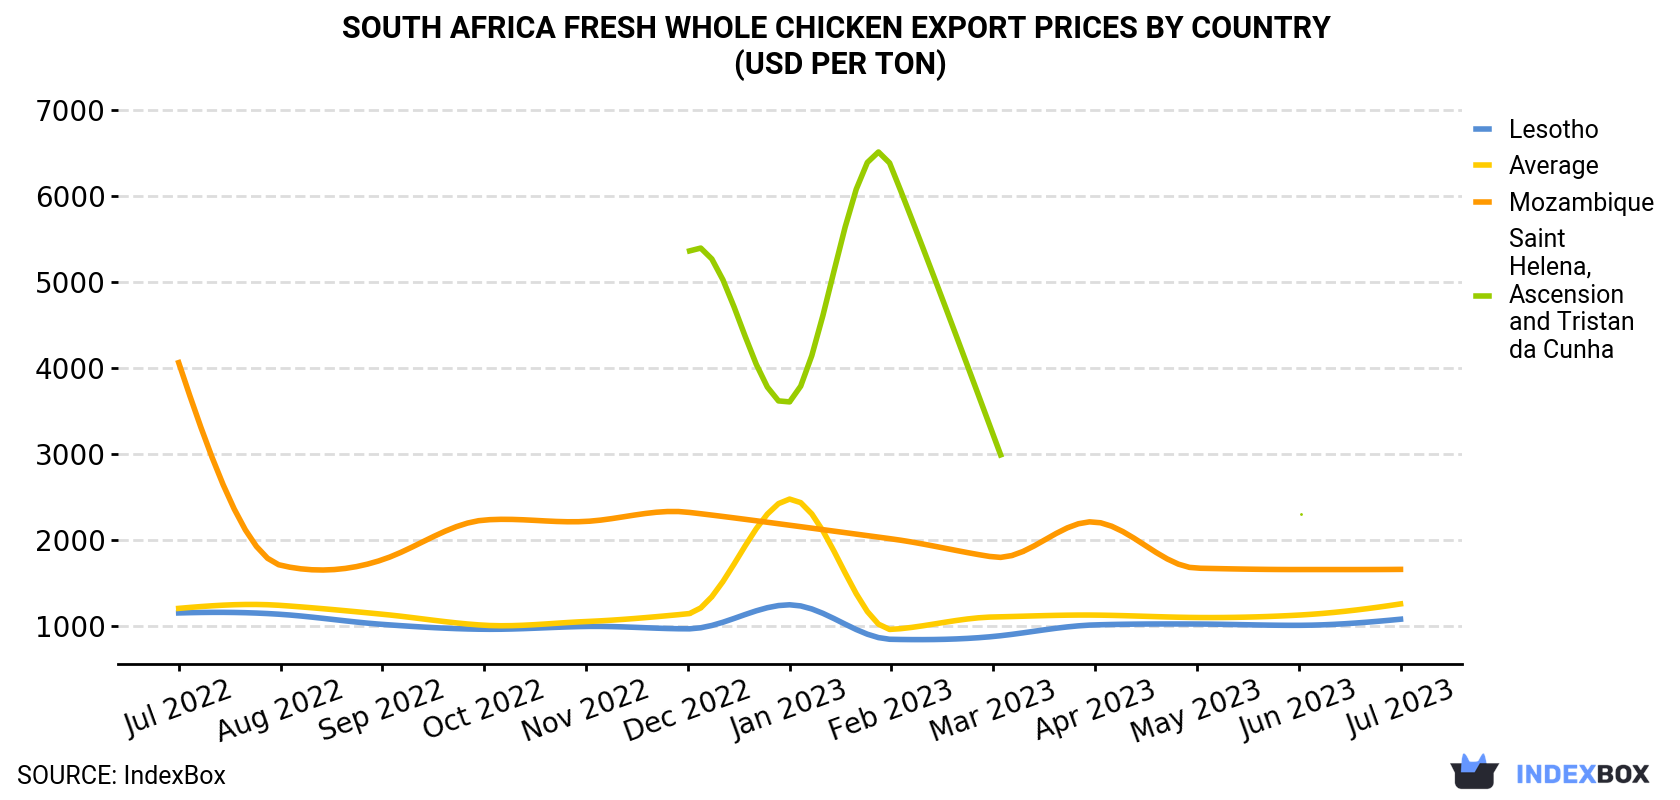 South Africa Fresh Whole Chicken Export Prices By Country (USD Per Ton)